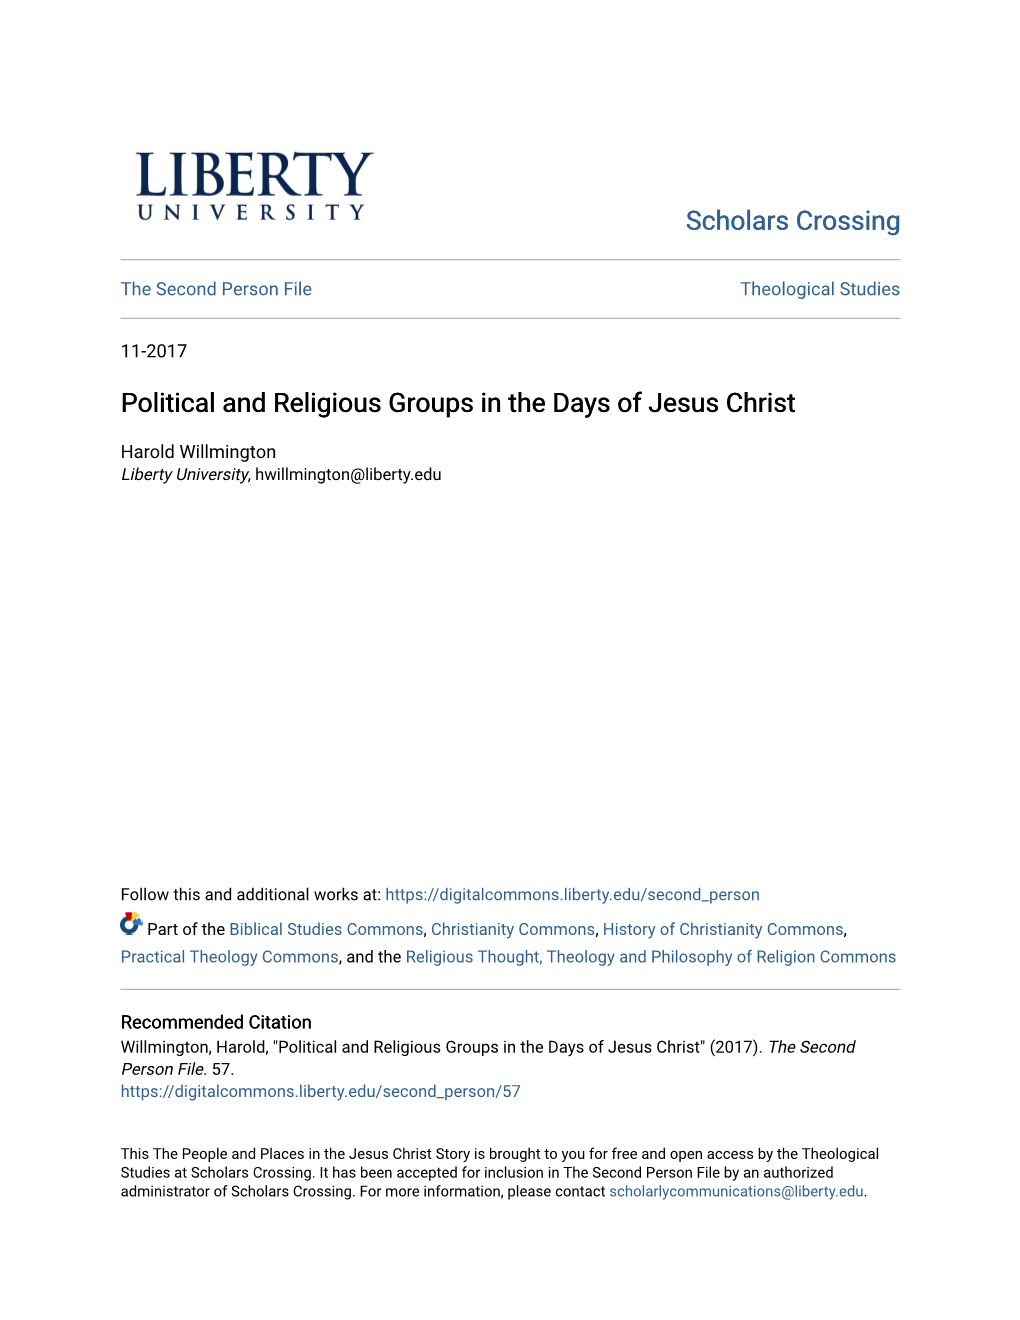 Political and Religious Groups in the Days of Jesus Christ